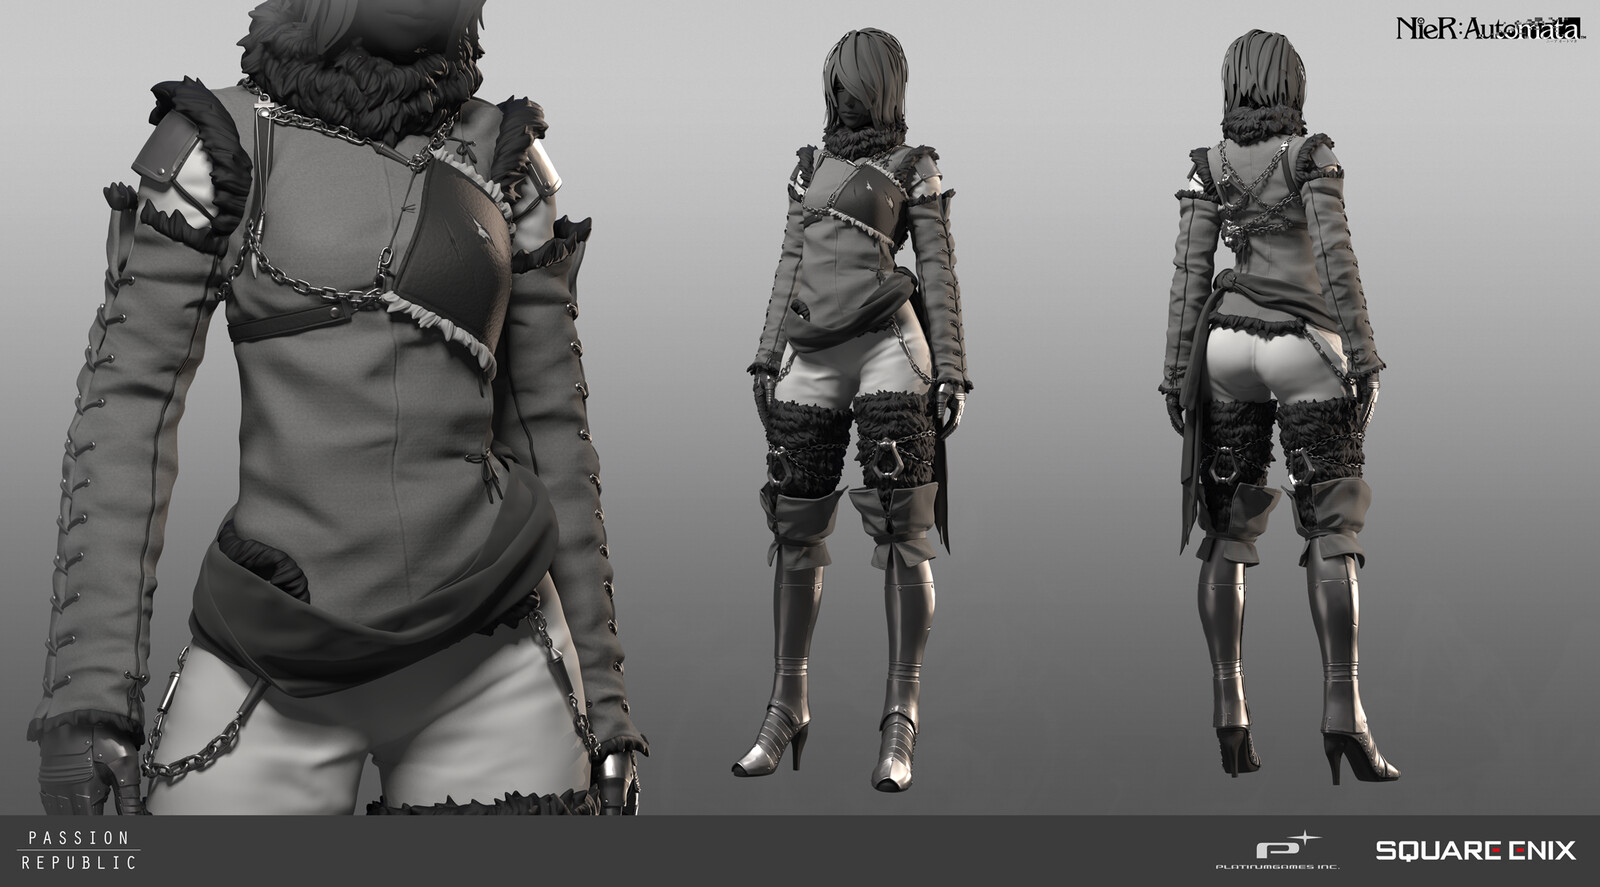 Nier Automata "Destroyer Outfit" for A2.